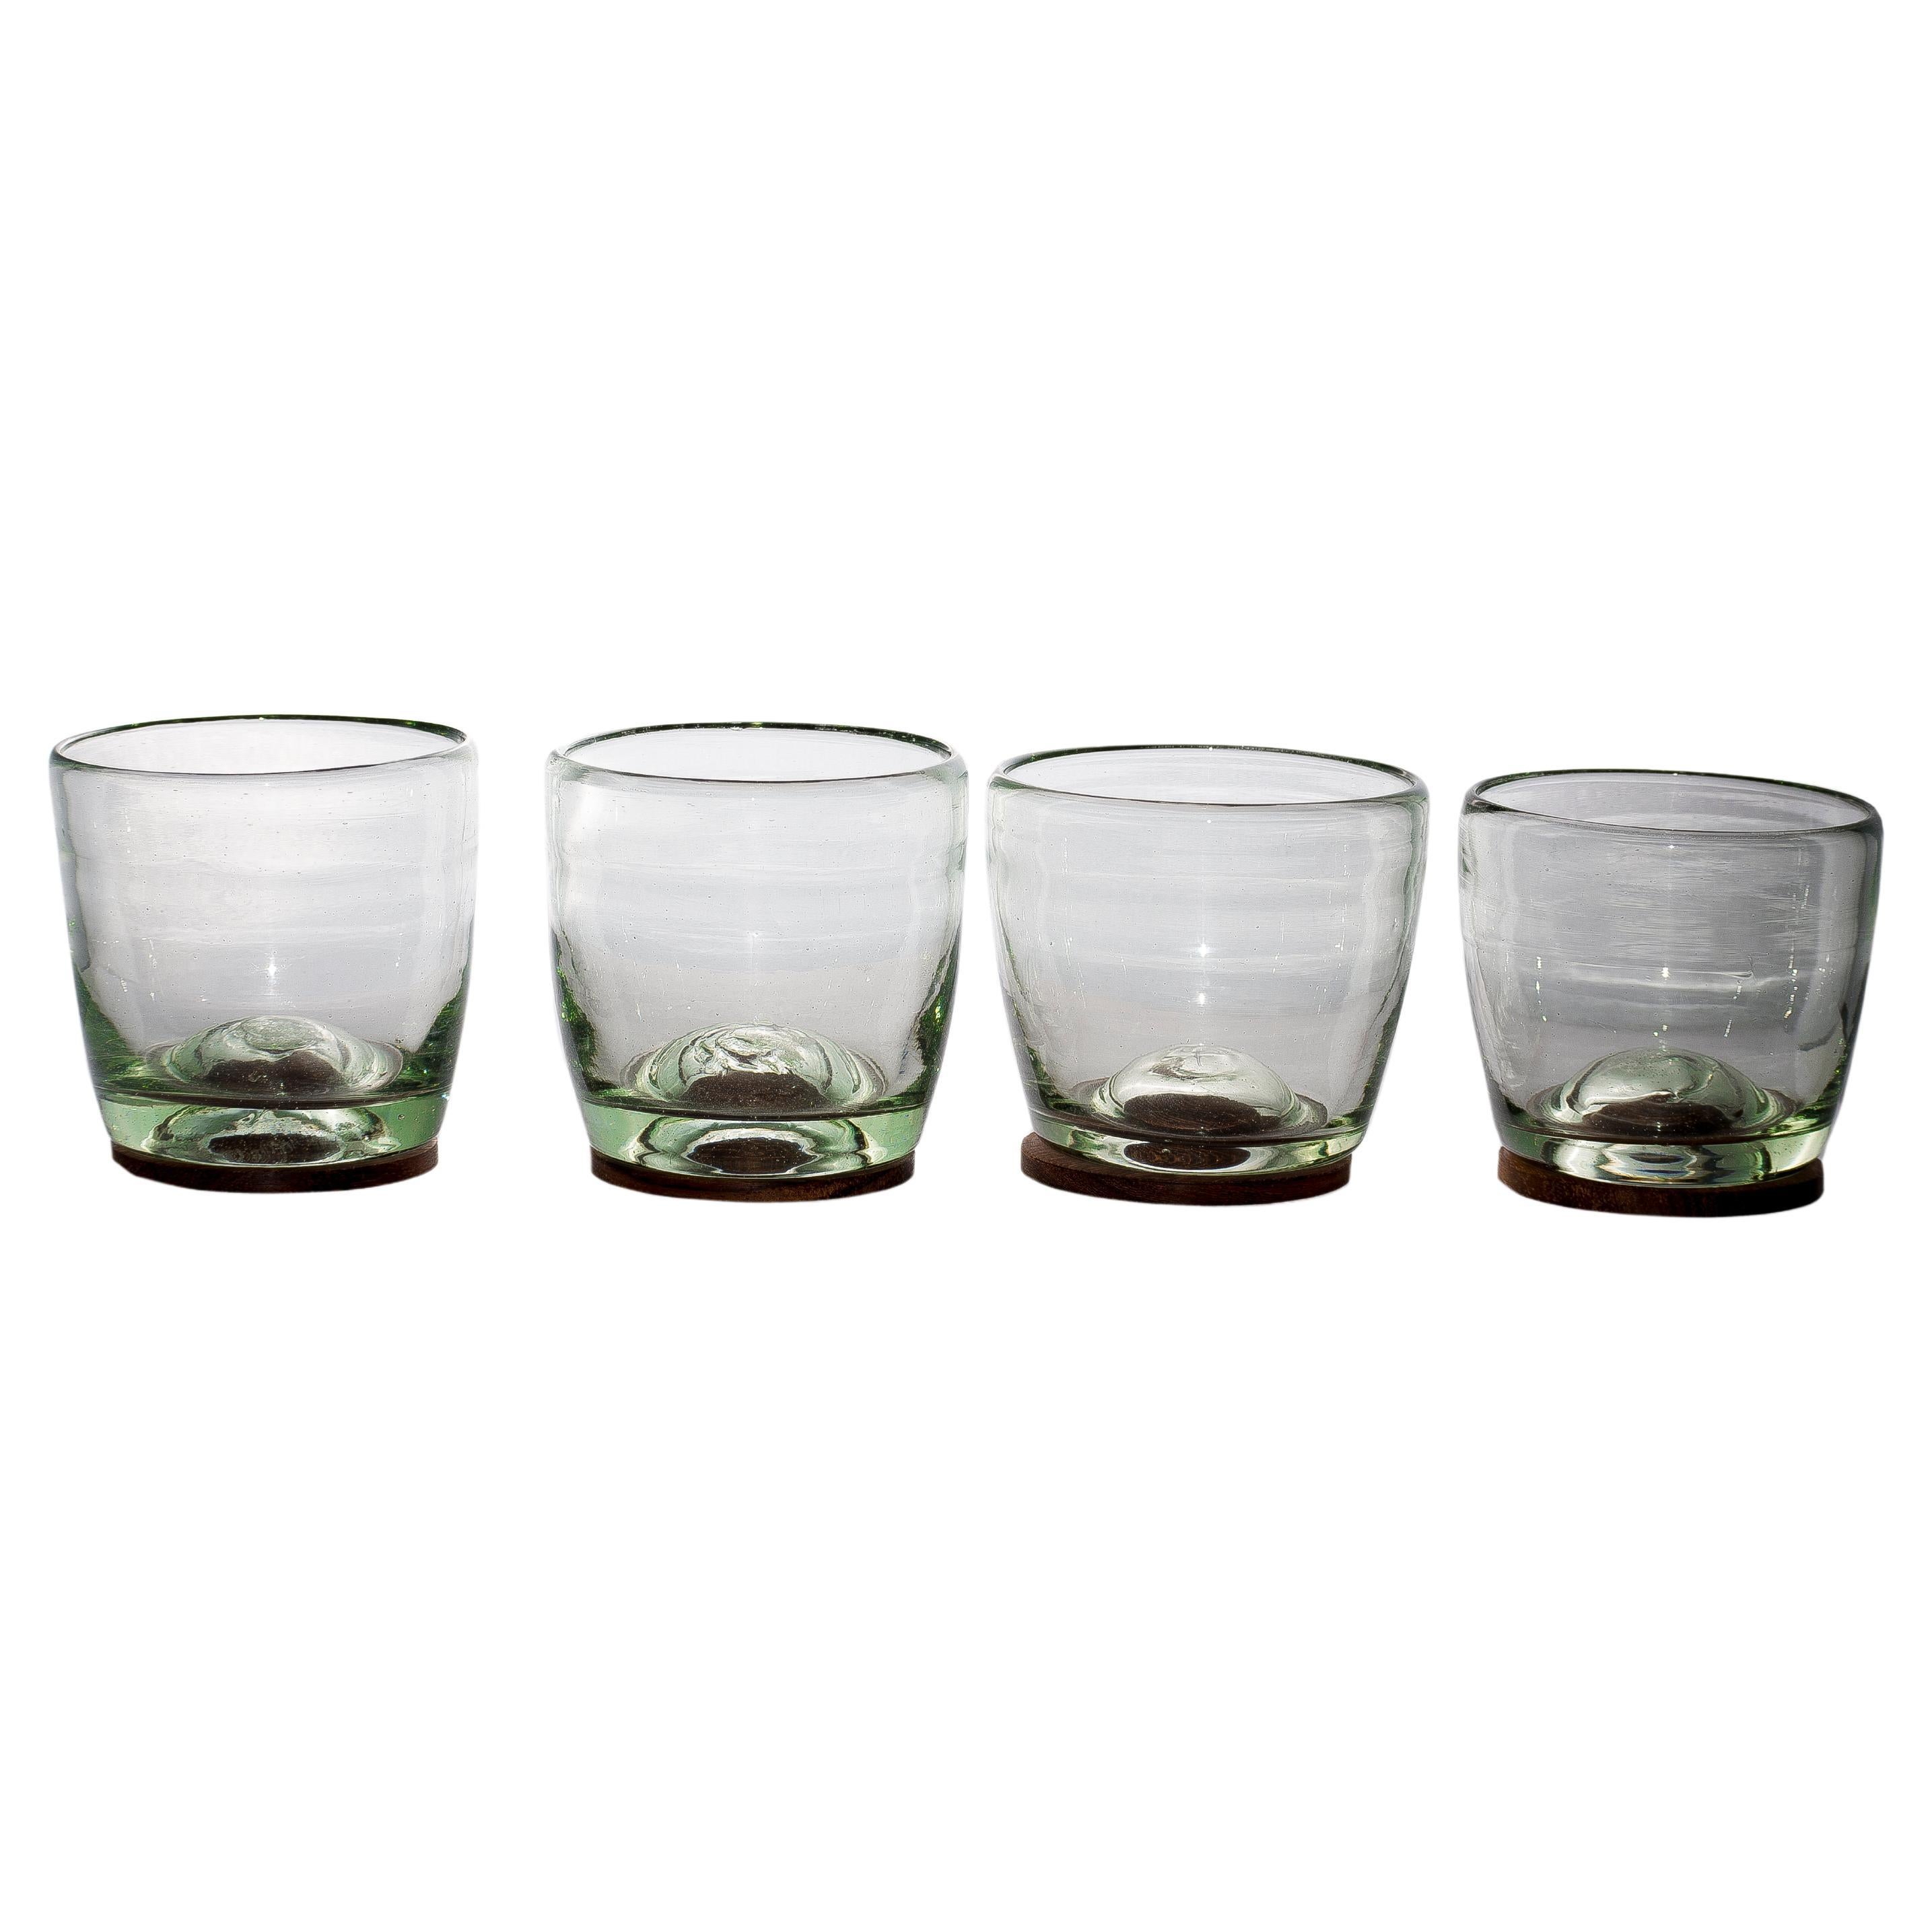 4 Piece Set of Transparent Hand Blown Glasses with Parota Wood Coasters For Sale